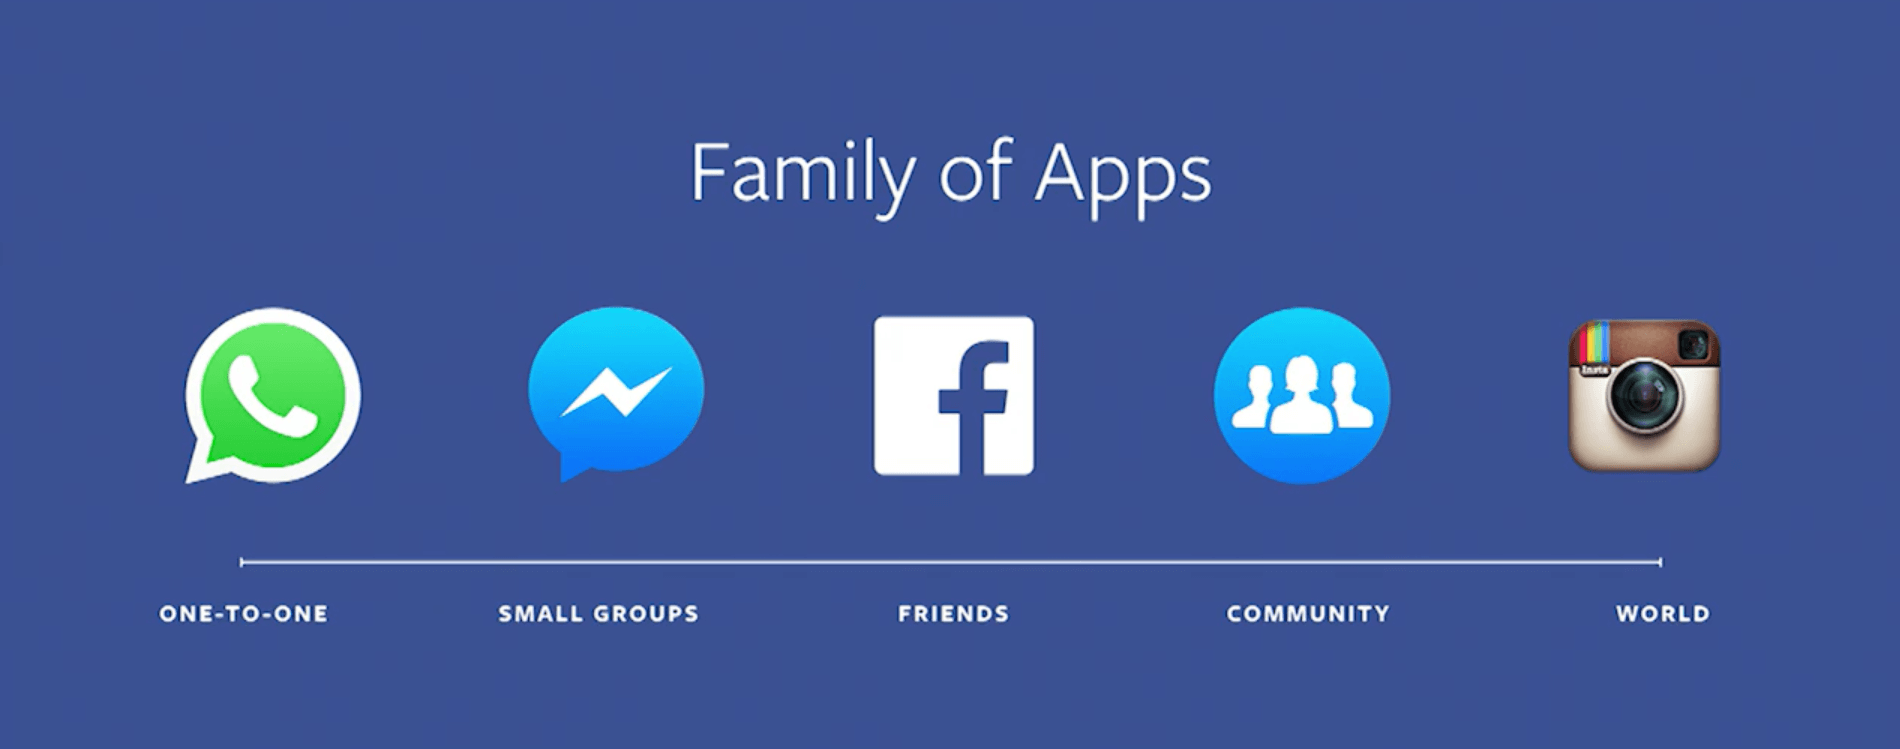 Facebook Family of Apps